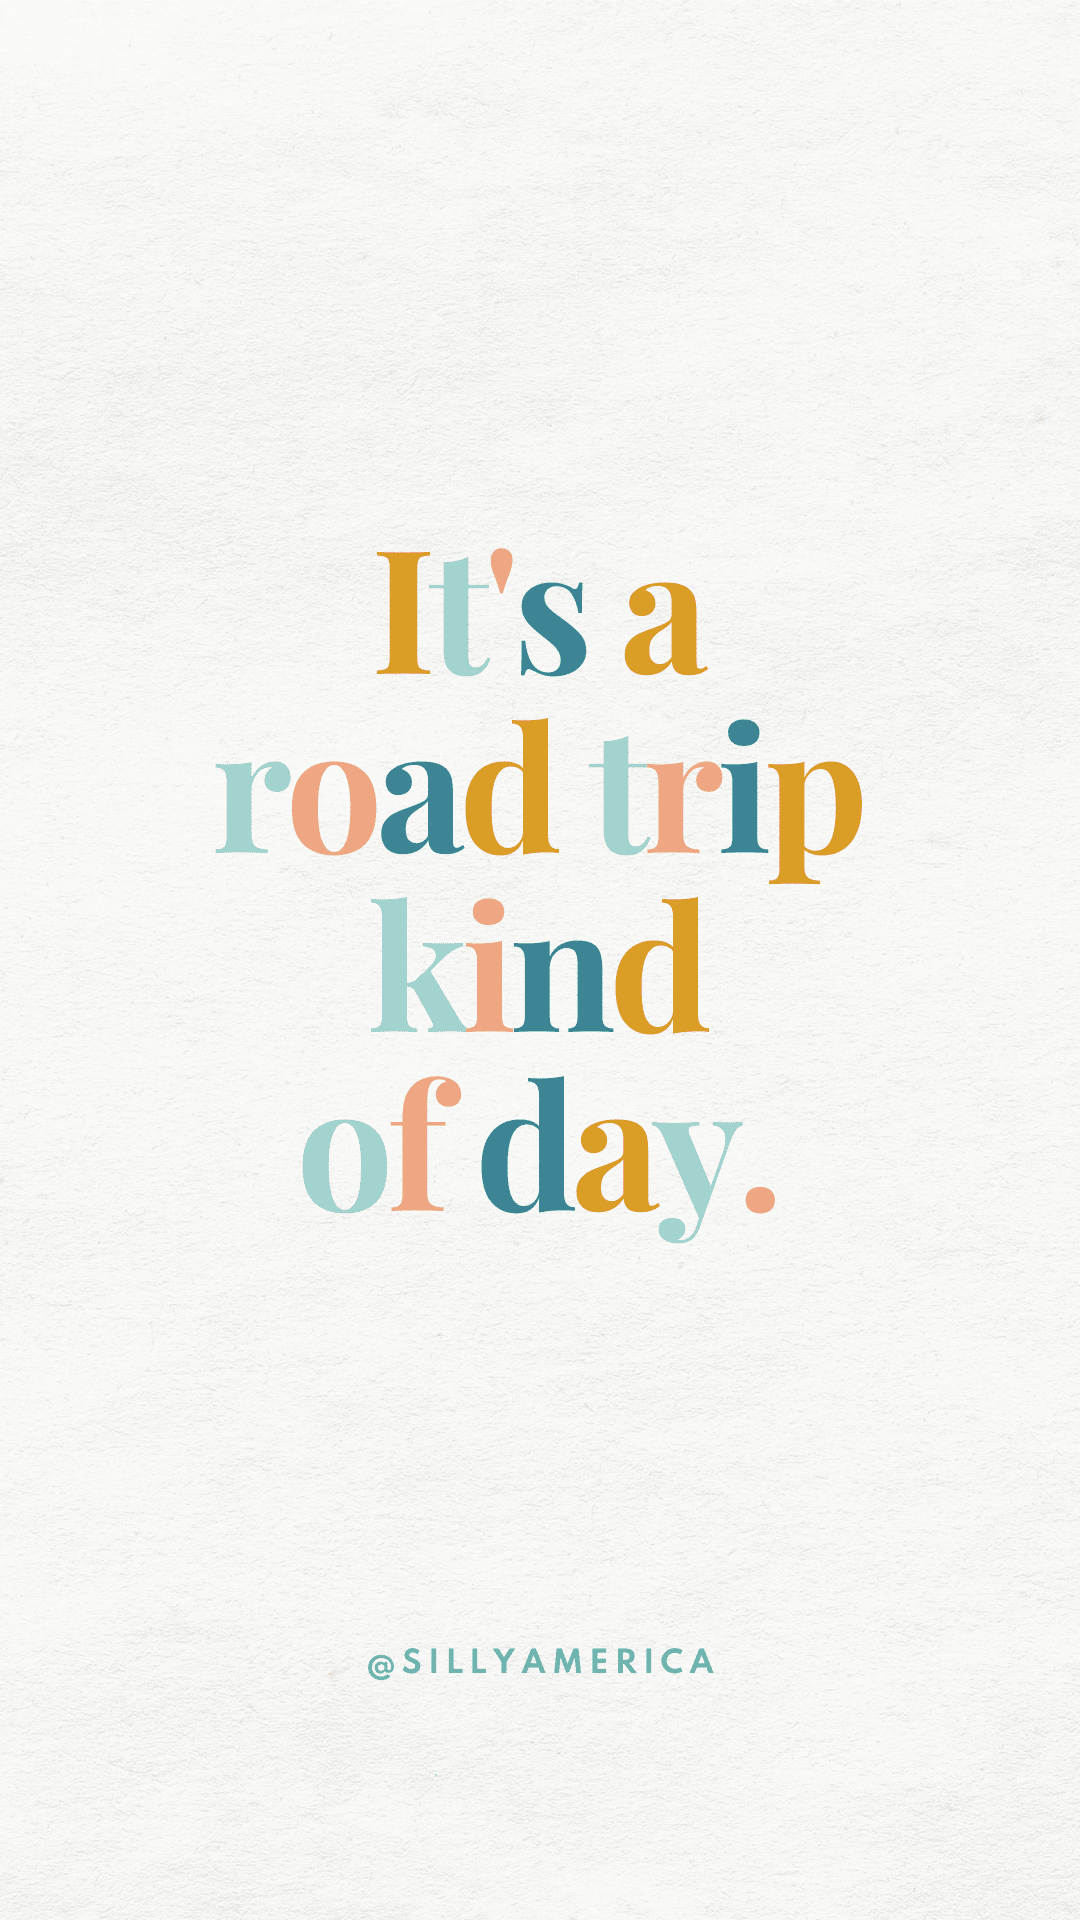 It's a road trip kind of day. - Road Trip Captions for Instagram